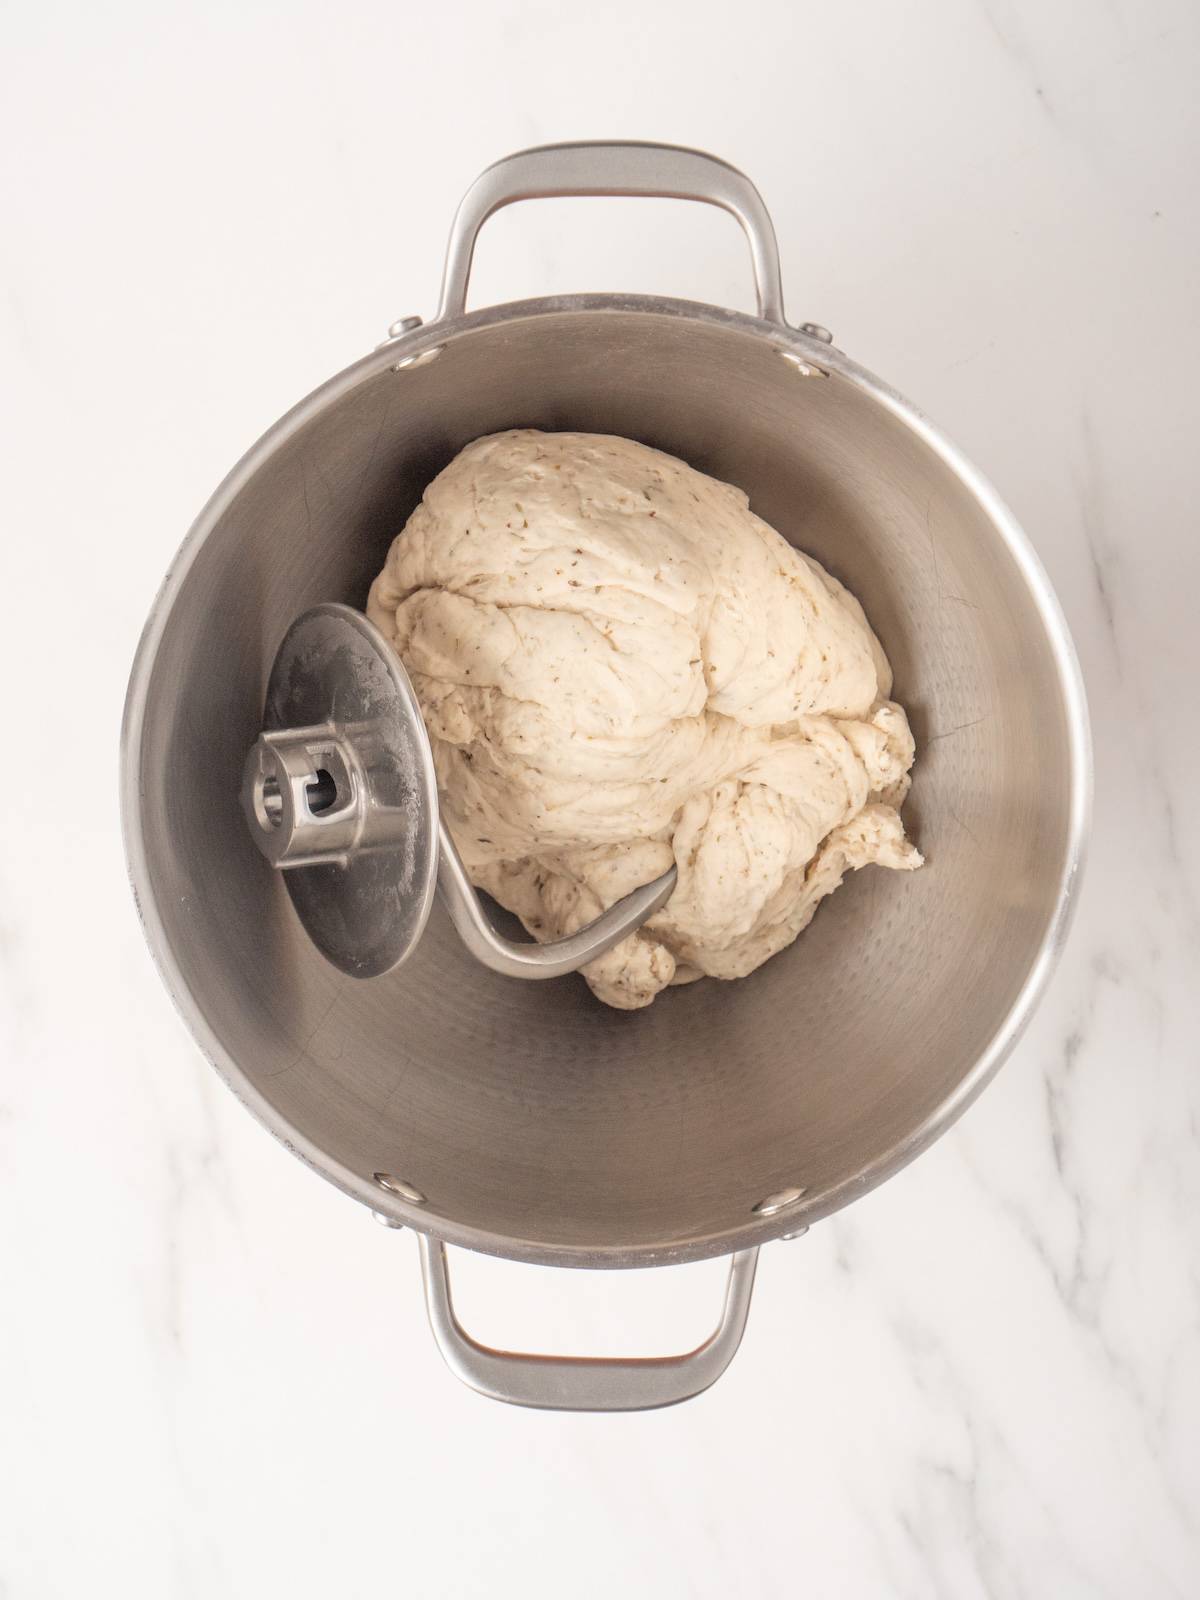 A stand mixer with pretzel dough kneaded and tangled in the dough hook attachment.